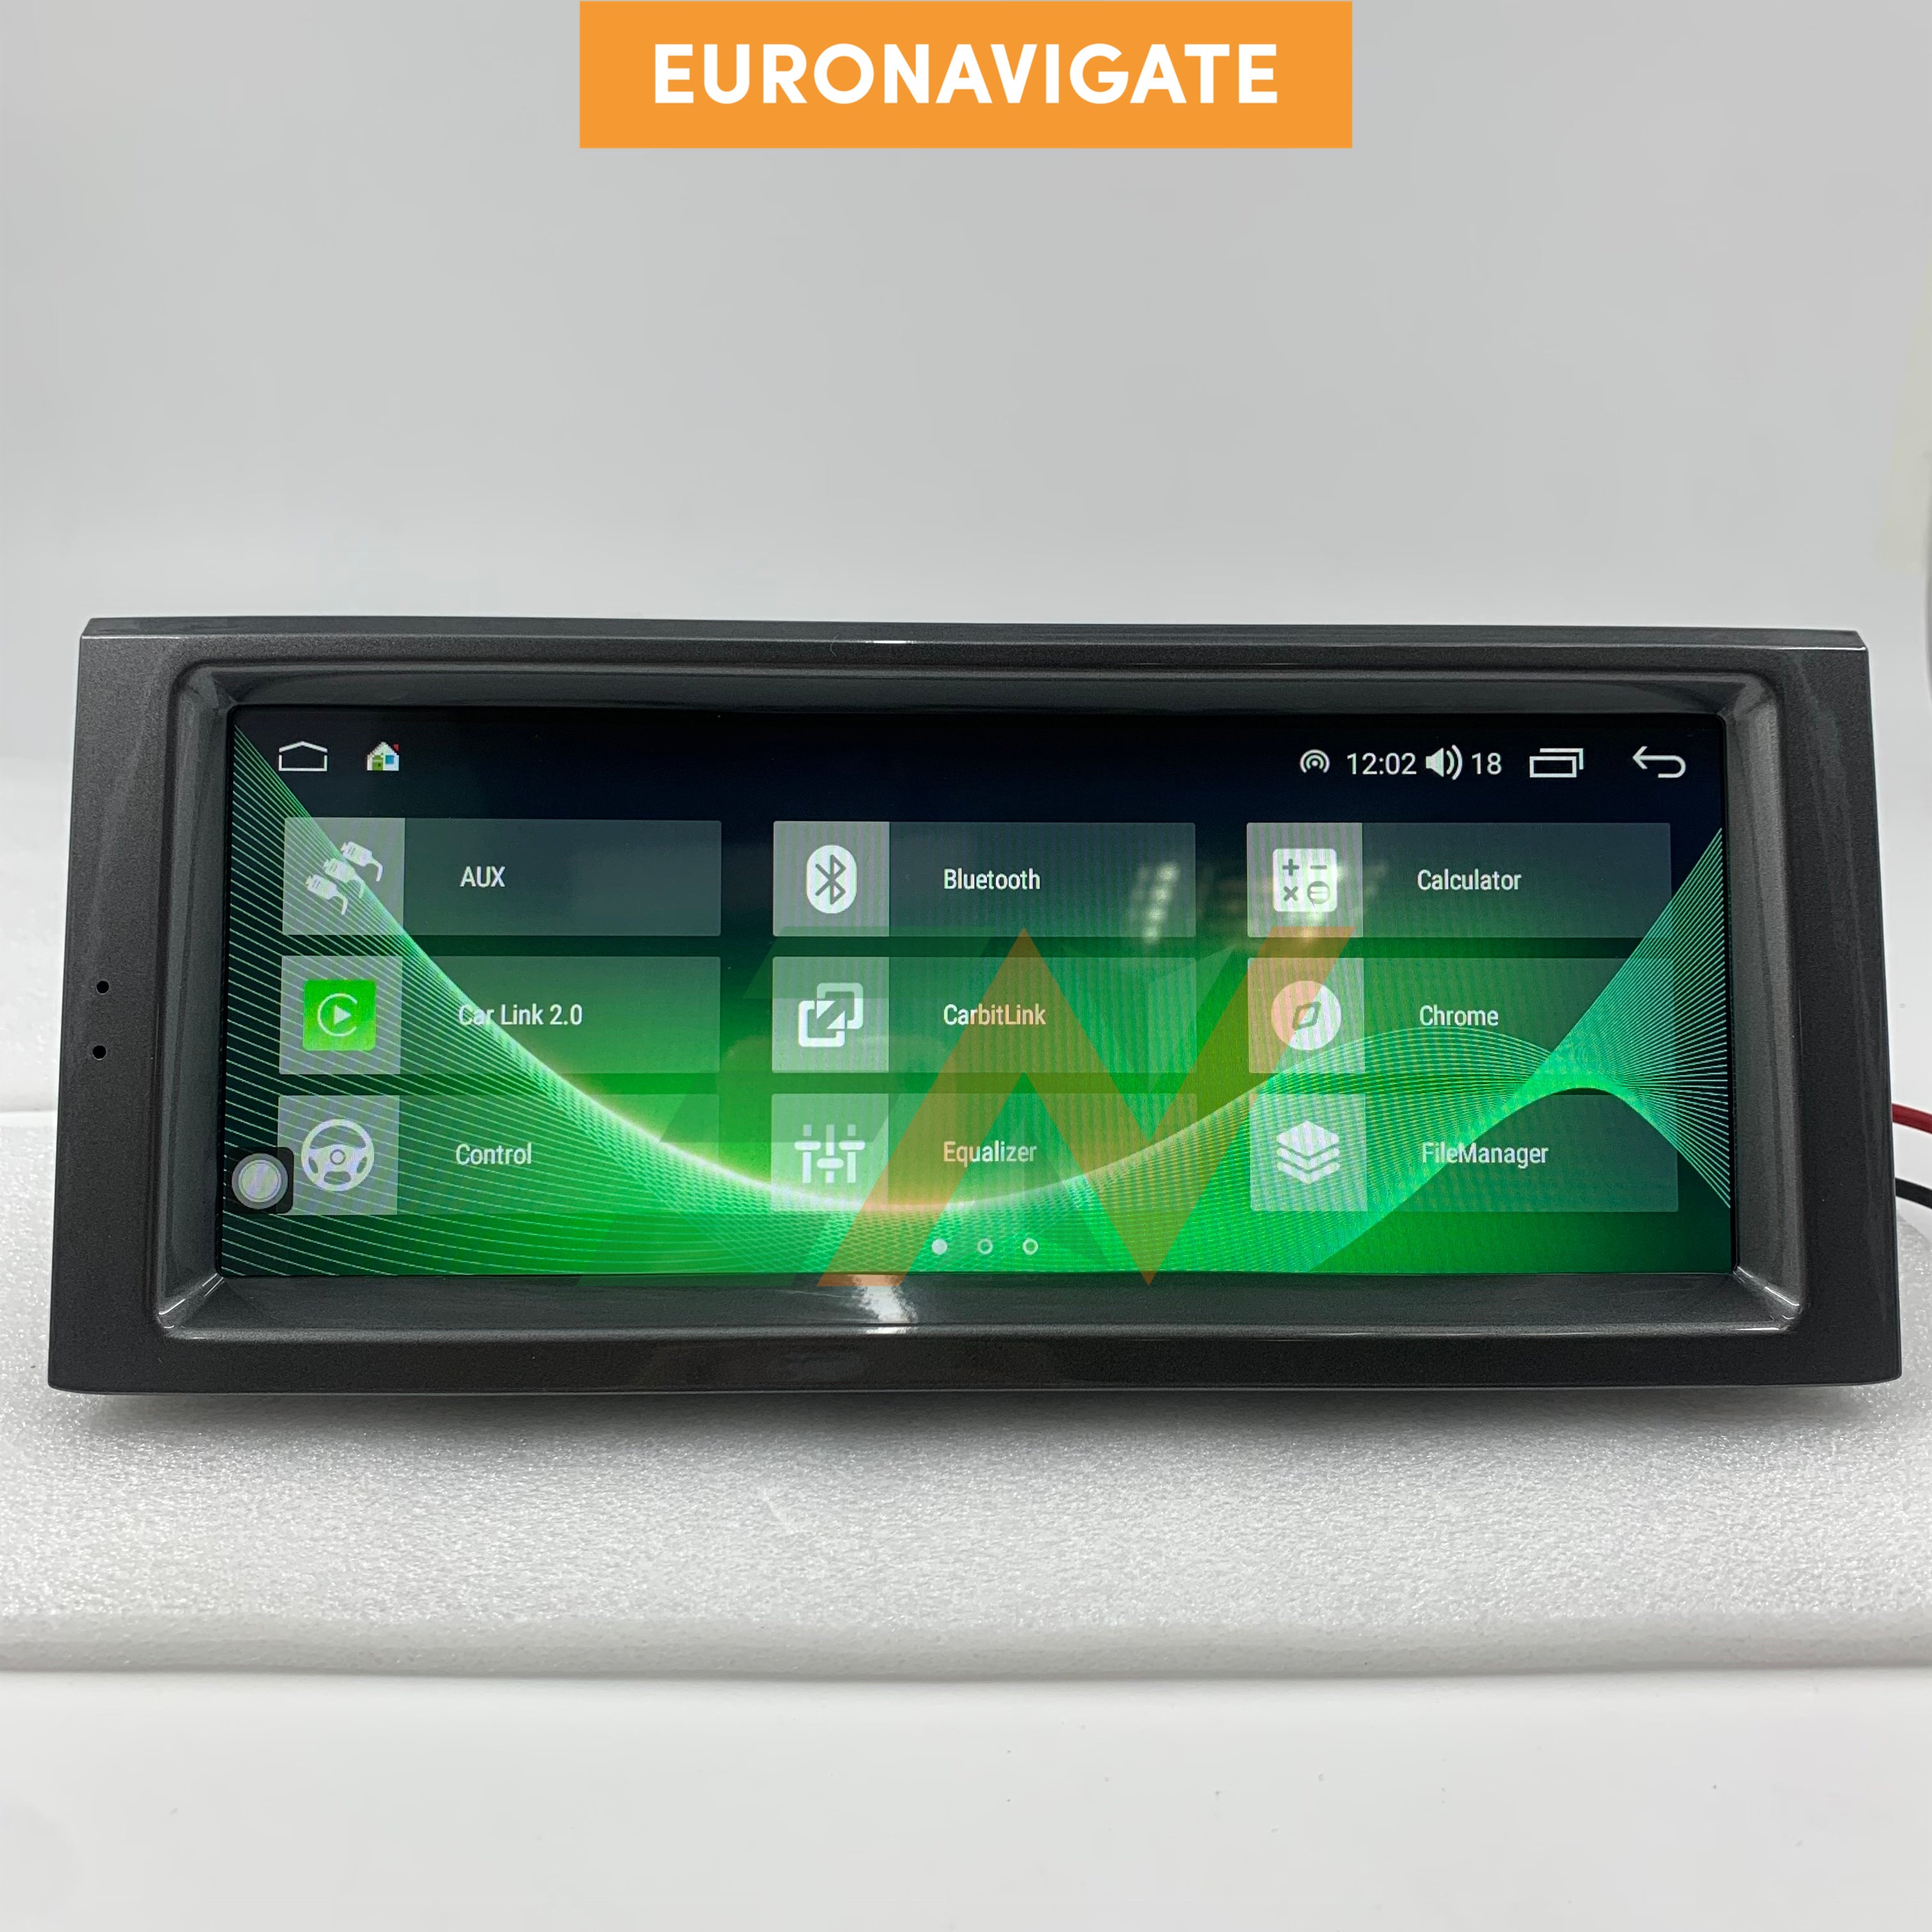 Upgrade your driving experience in the Range Rover Vogue L322 with Euronavigate's 12.0 Android 10.25-inch infotainment system. The customizable display and intuitive controls make it simple to stay connected while keeping your eyes on the road.